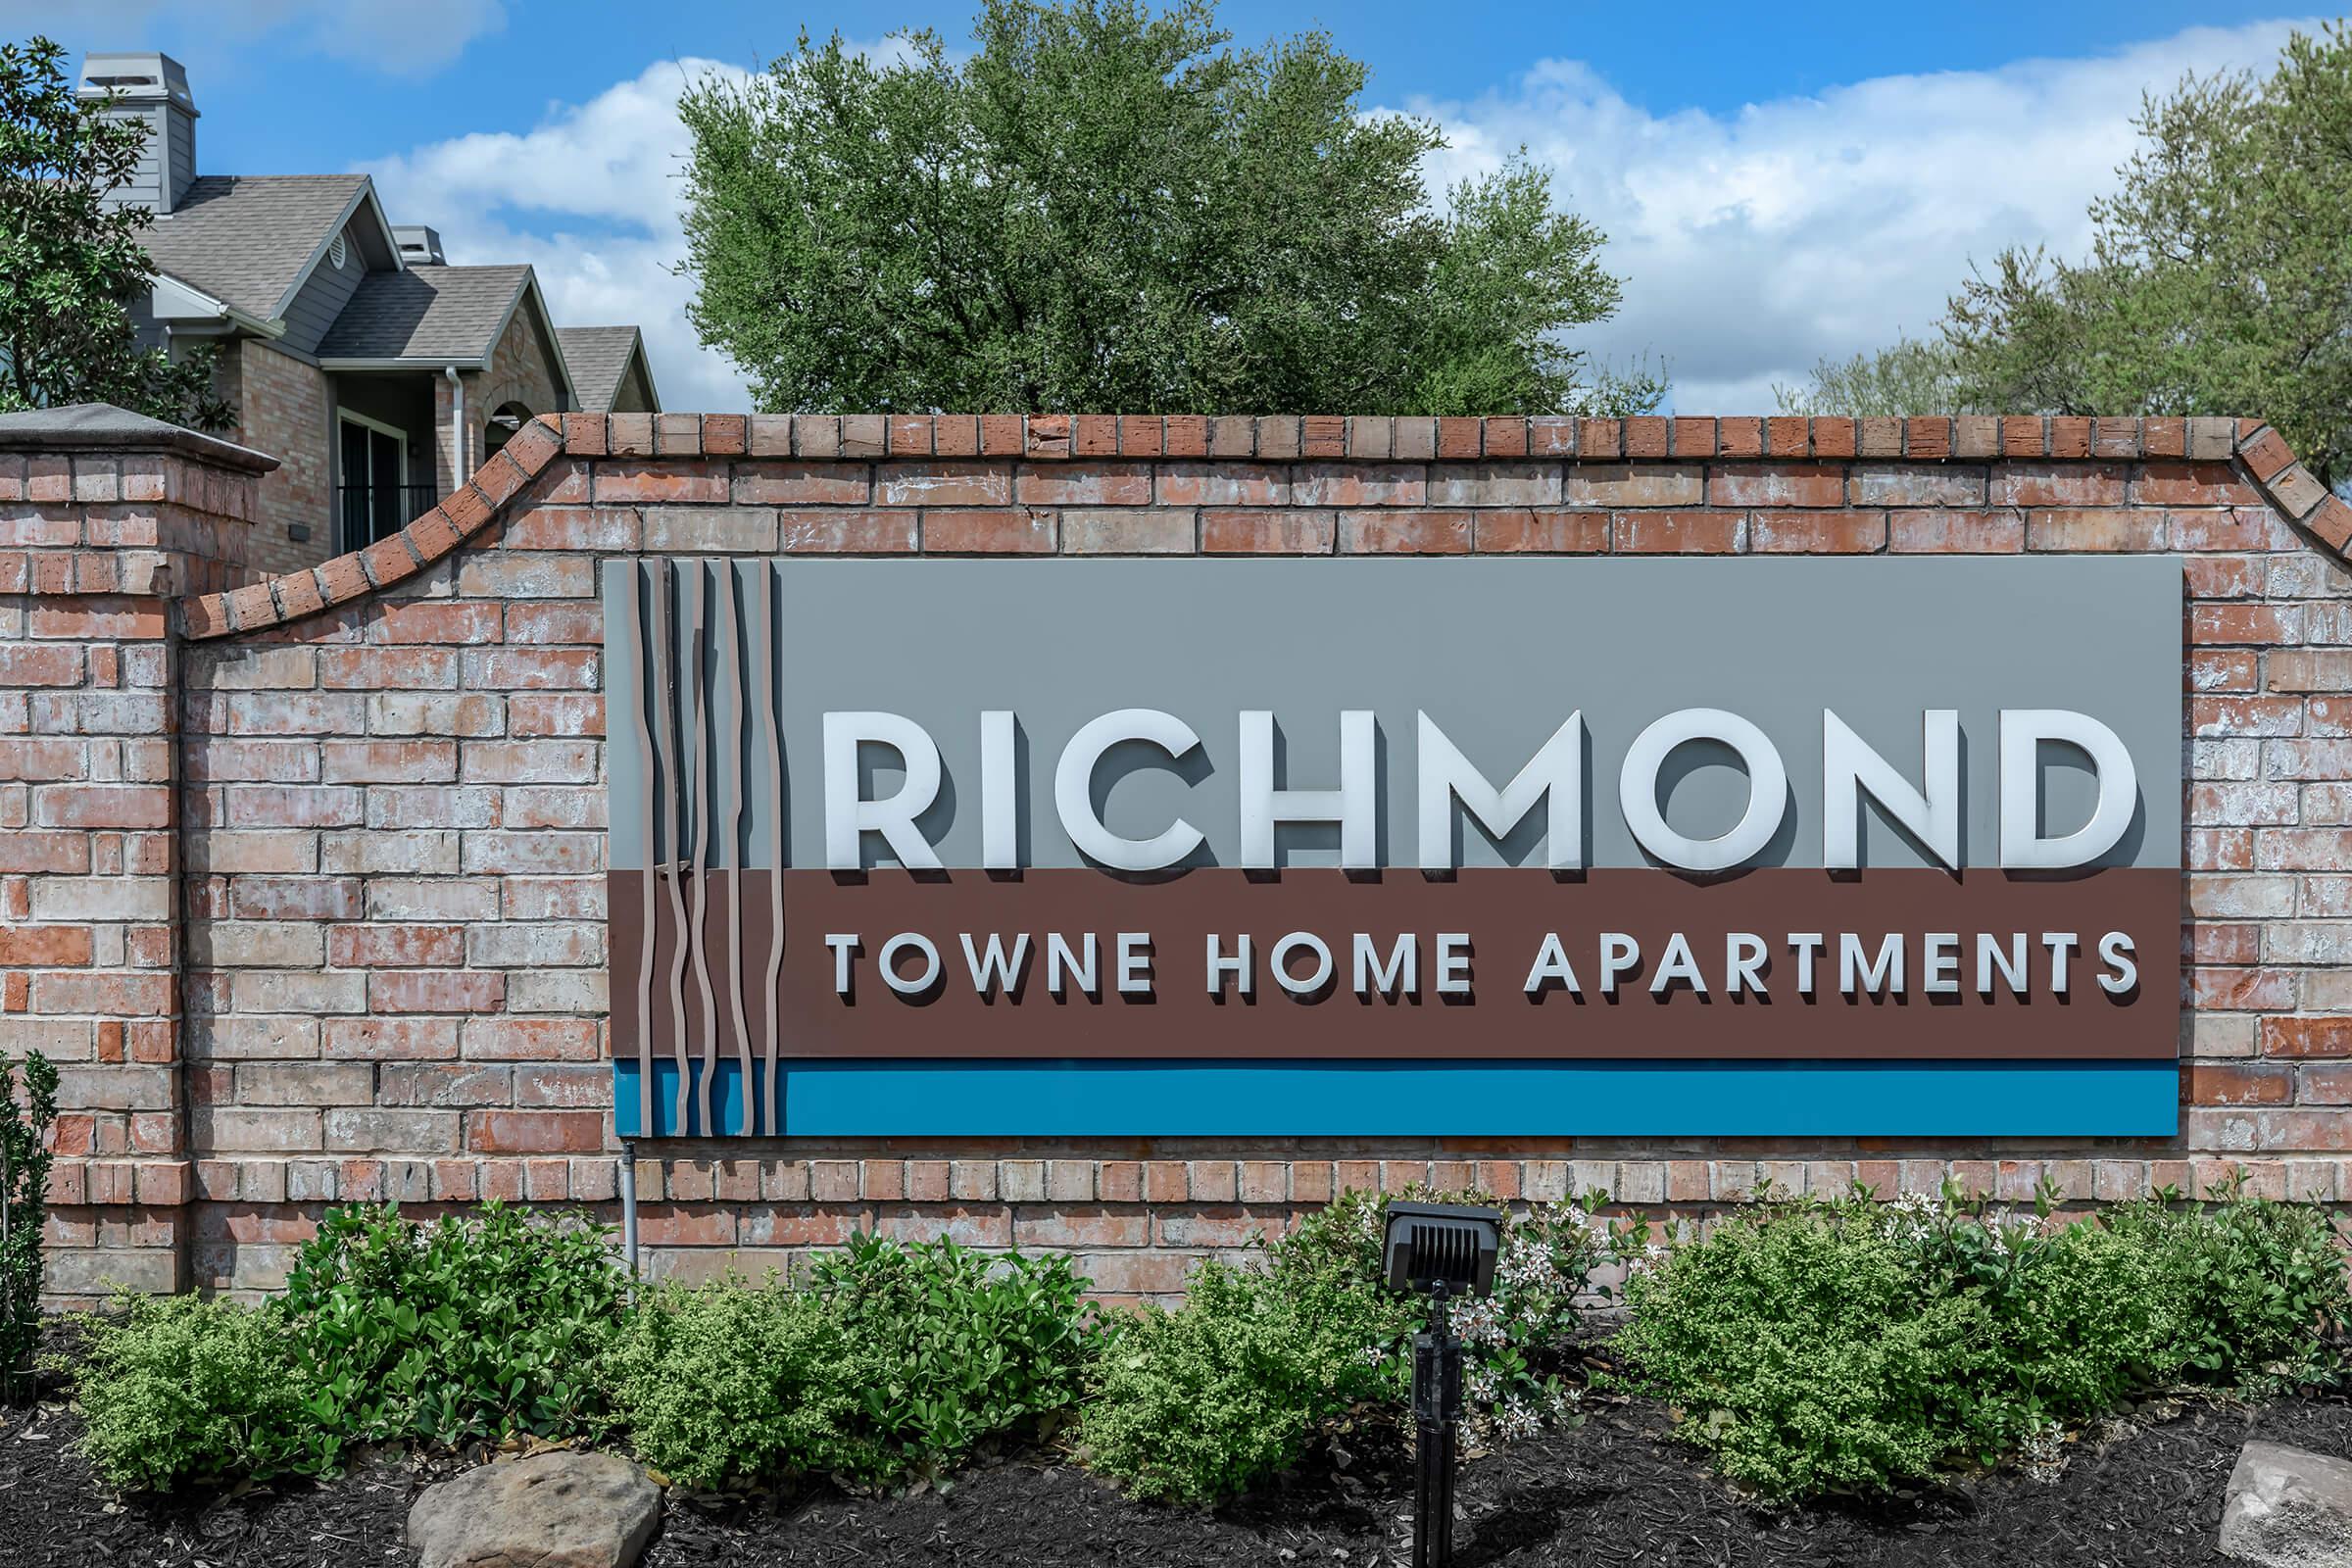 SPACIOUS TOWNE HOME APARTMENTS WITH ATTACHED GARAGES